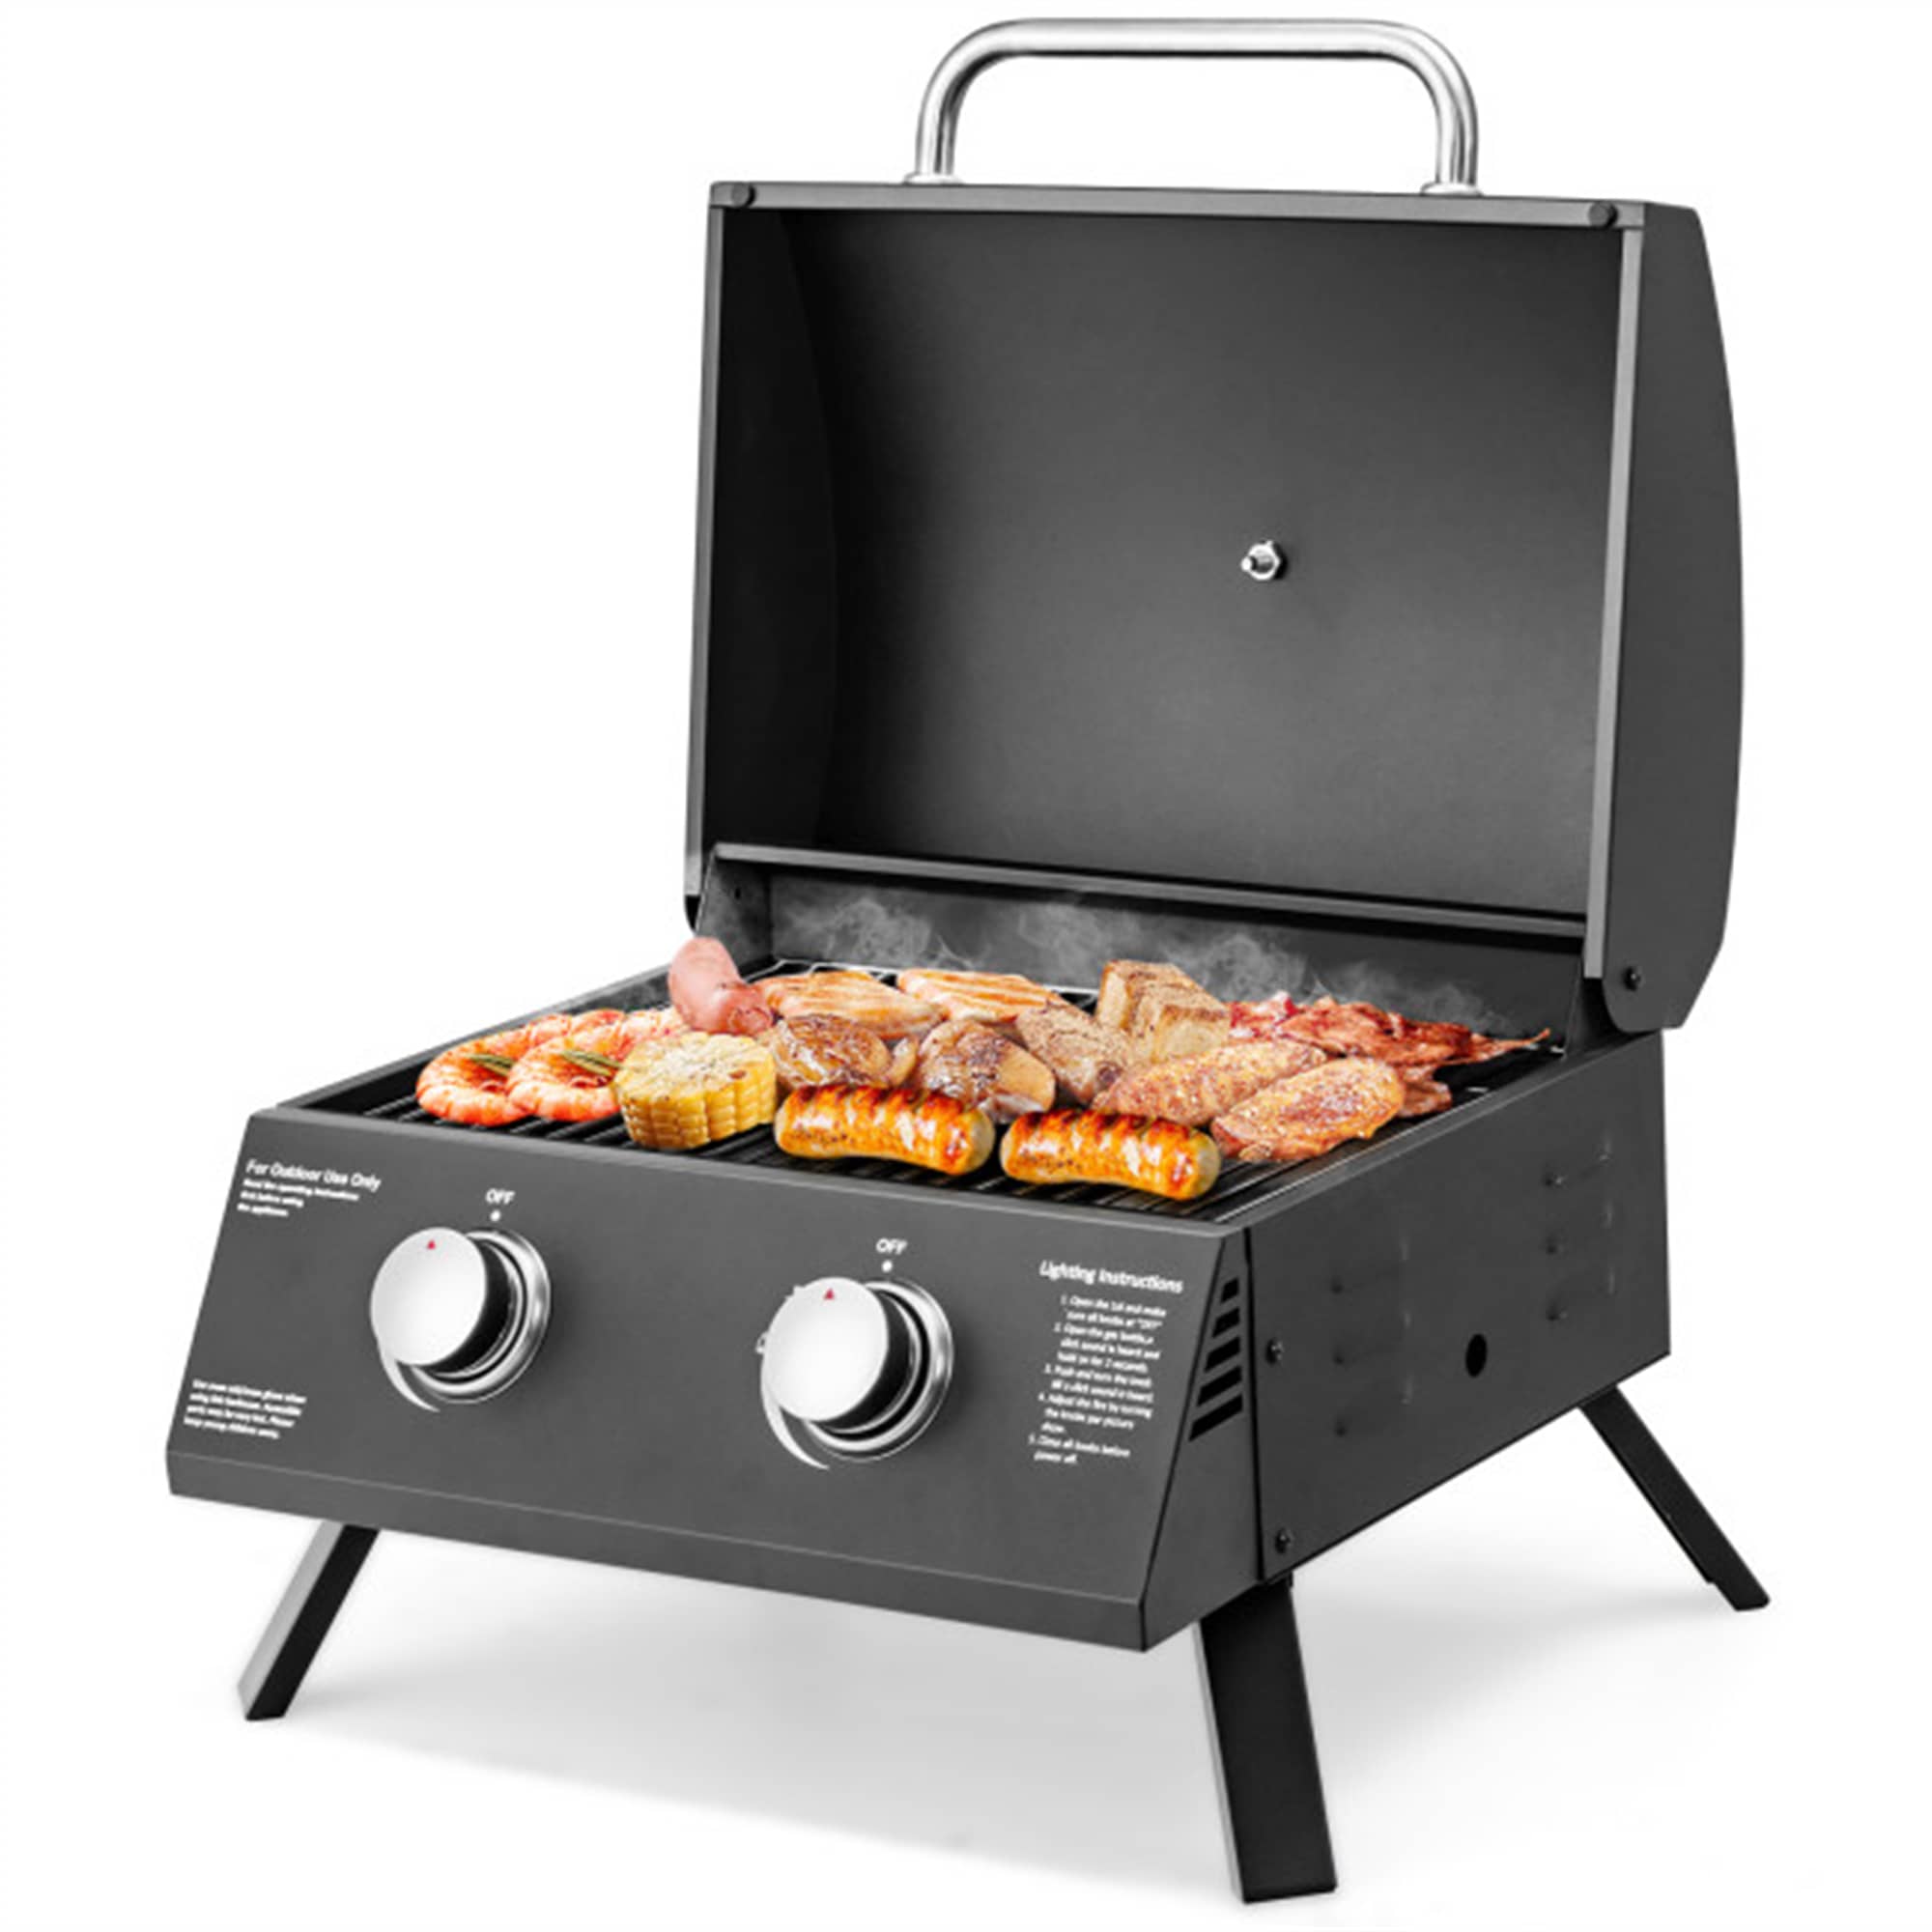 CASAINC 2-Burner Propane Gas Grill 20000 BTU Outdoor Portable with Thermometer